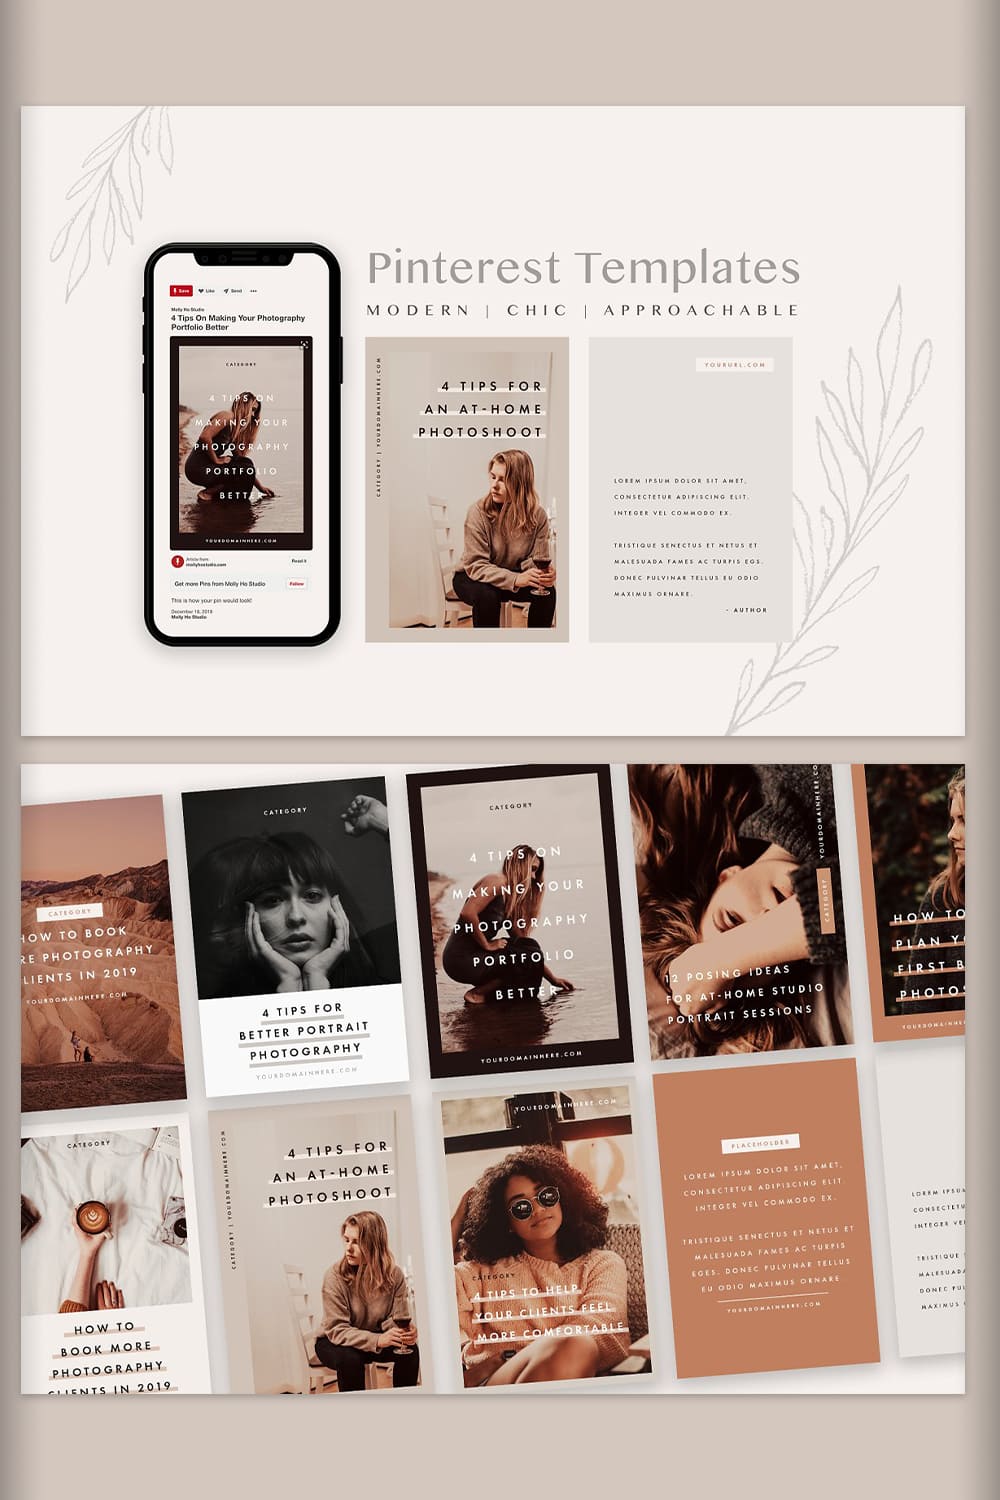 Pinterest Templates -"4 Tips For An At - Home Photoshoot".